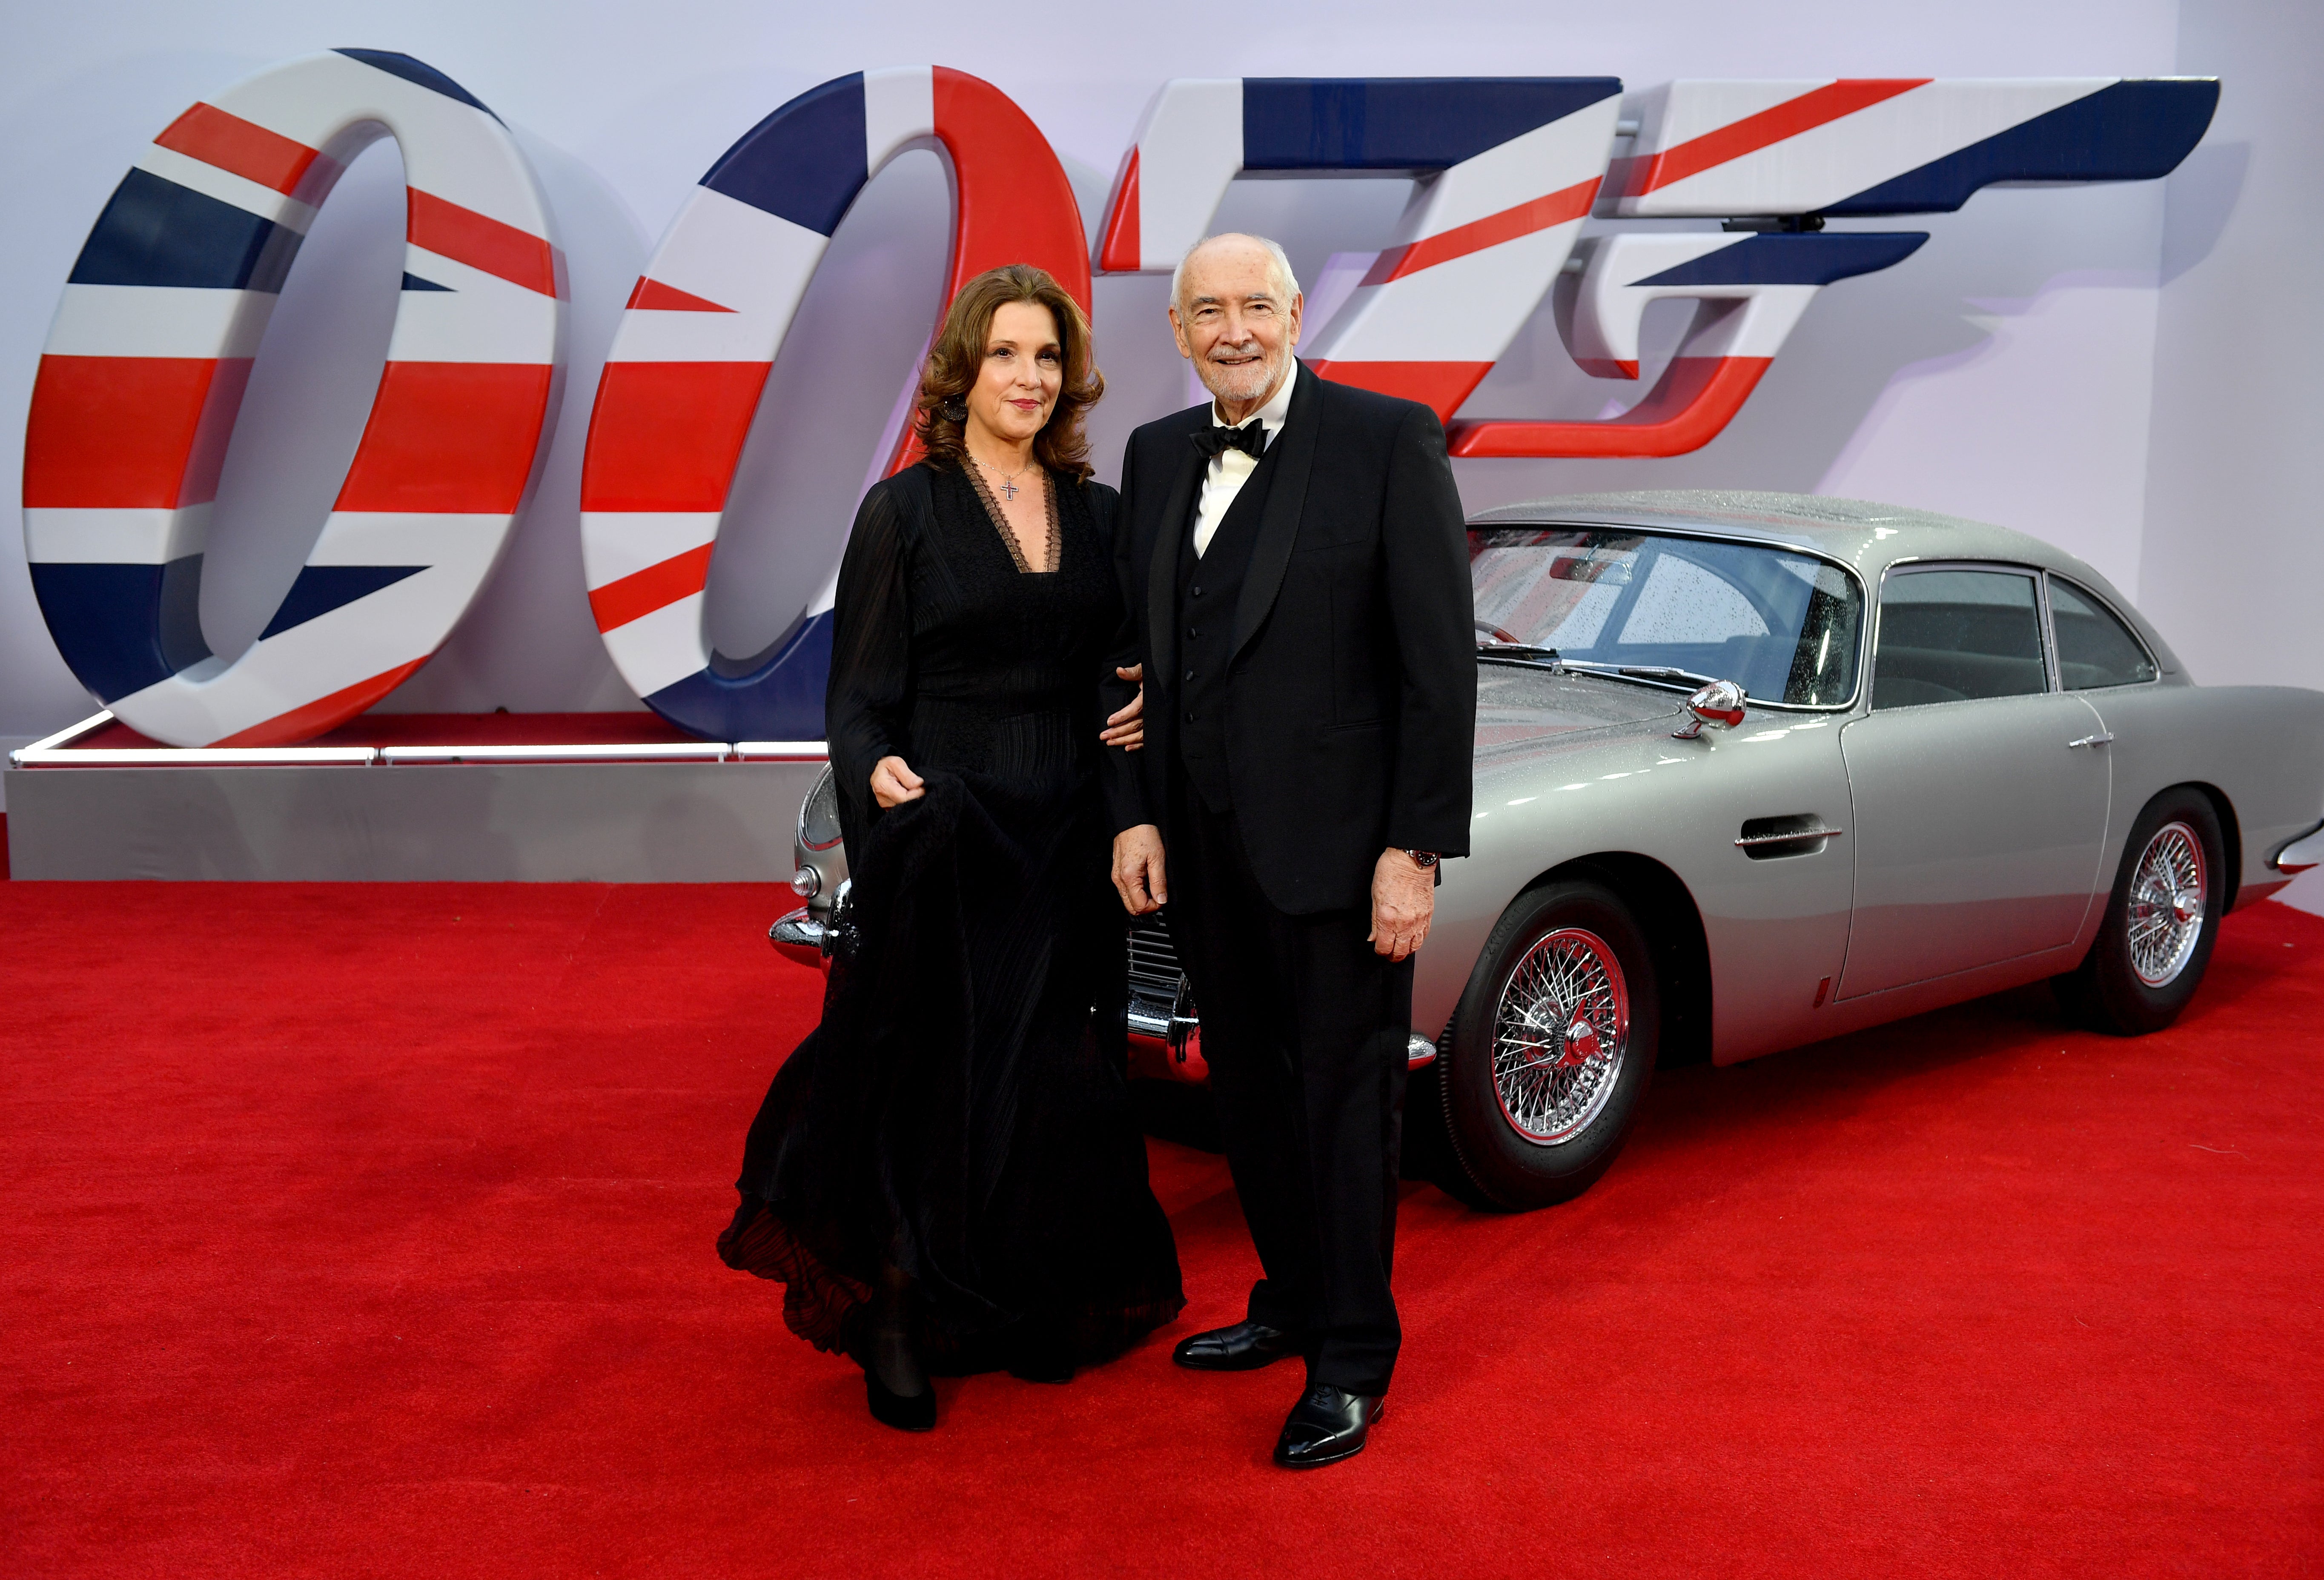 Bond producers Barbara Broccoli and Michael G Wilson at the ‘No Time to Die’ premiere in London on Tuesday